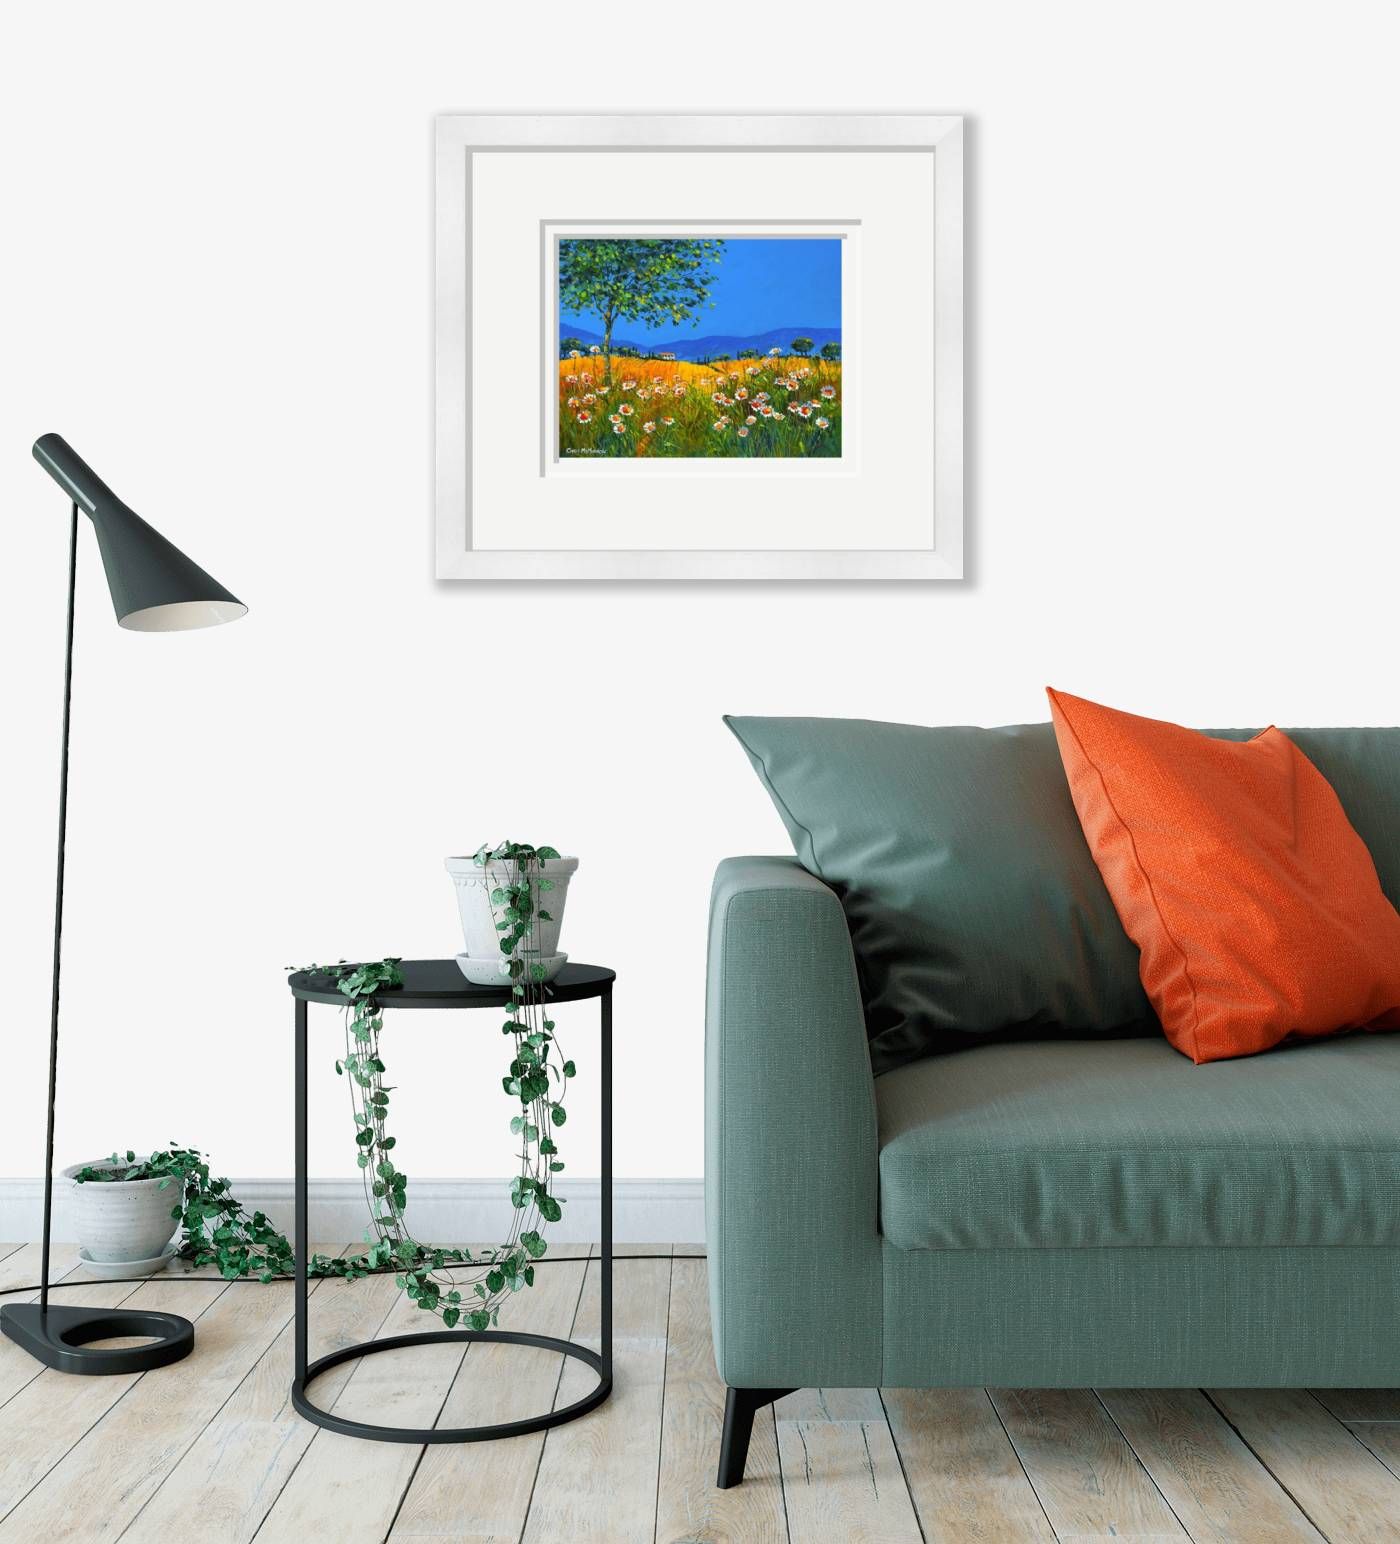 Large framed - Summer Daisies - 470 by Chris McMorrow